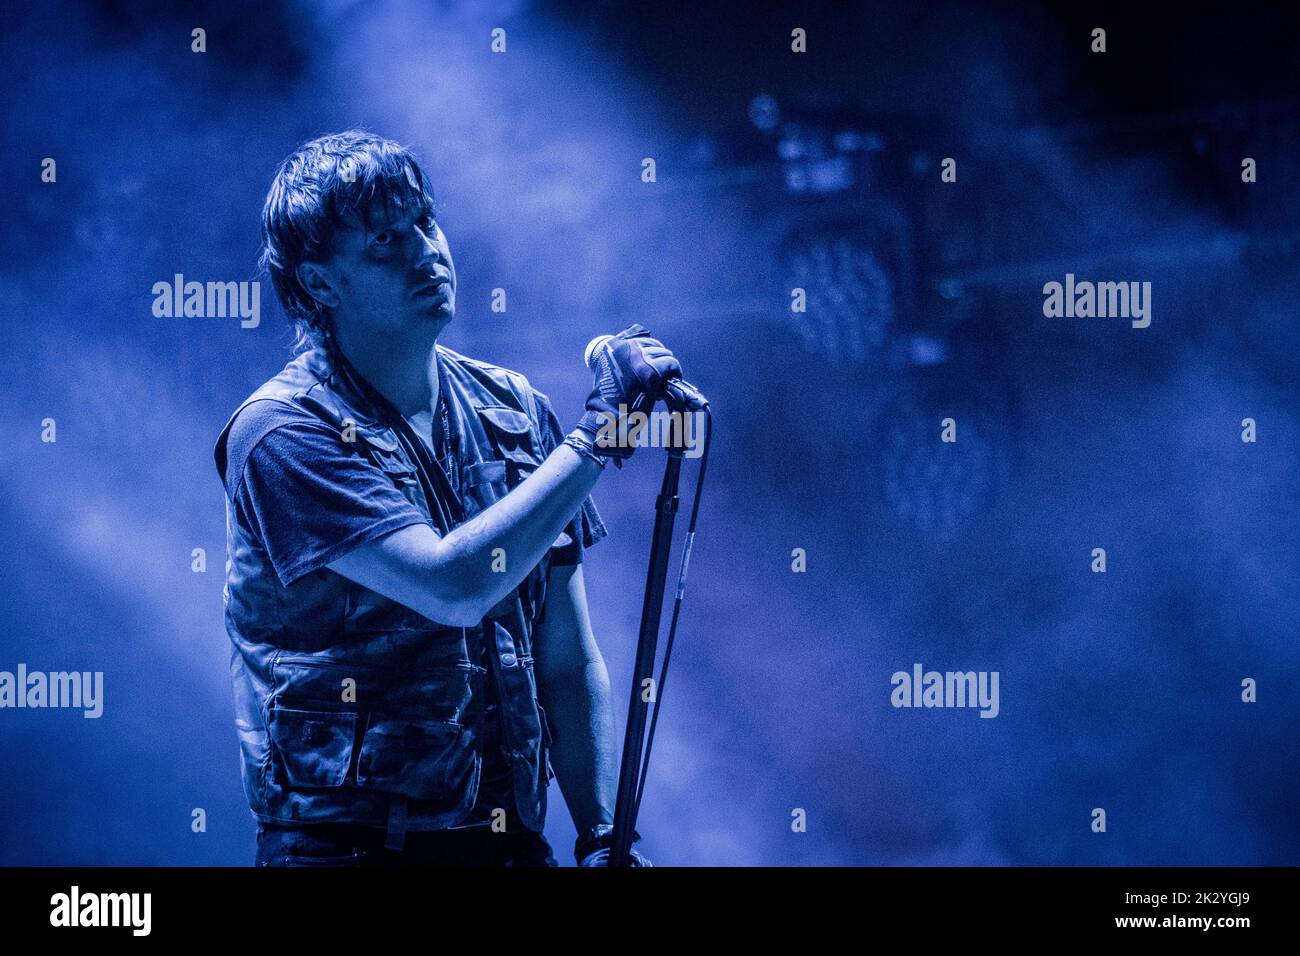 Roskilde, Denmark. 02nd, July 2022.The American rock band The Strokes performs a live concert at the Danish music festival Roskilde Festival 2022 in Roskilde. Here singer Julian Casablancas is seen live on stage. (Photo credit: Gonzales Photo - Thomas Rasmussen). Stock Photo